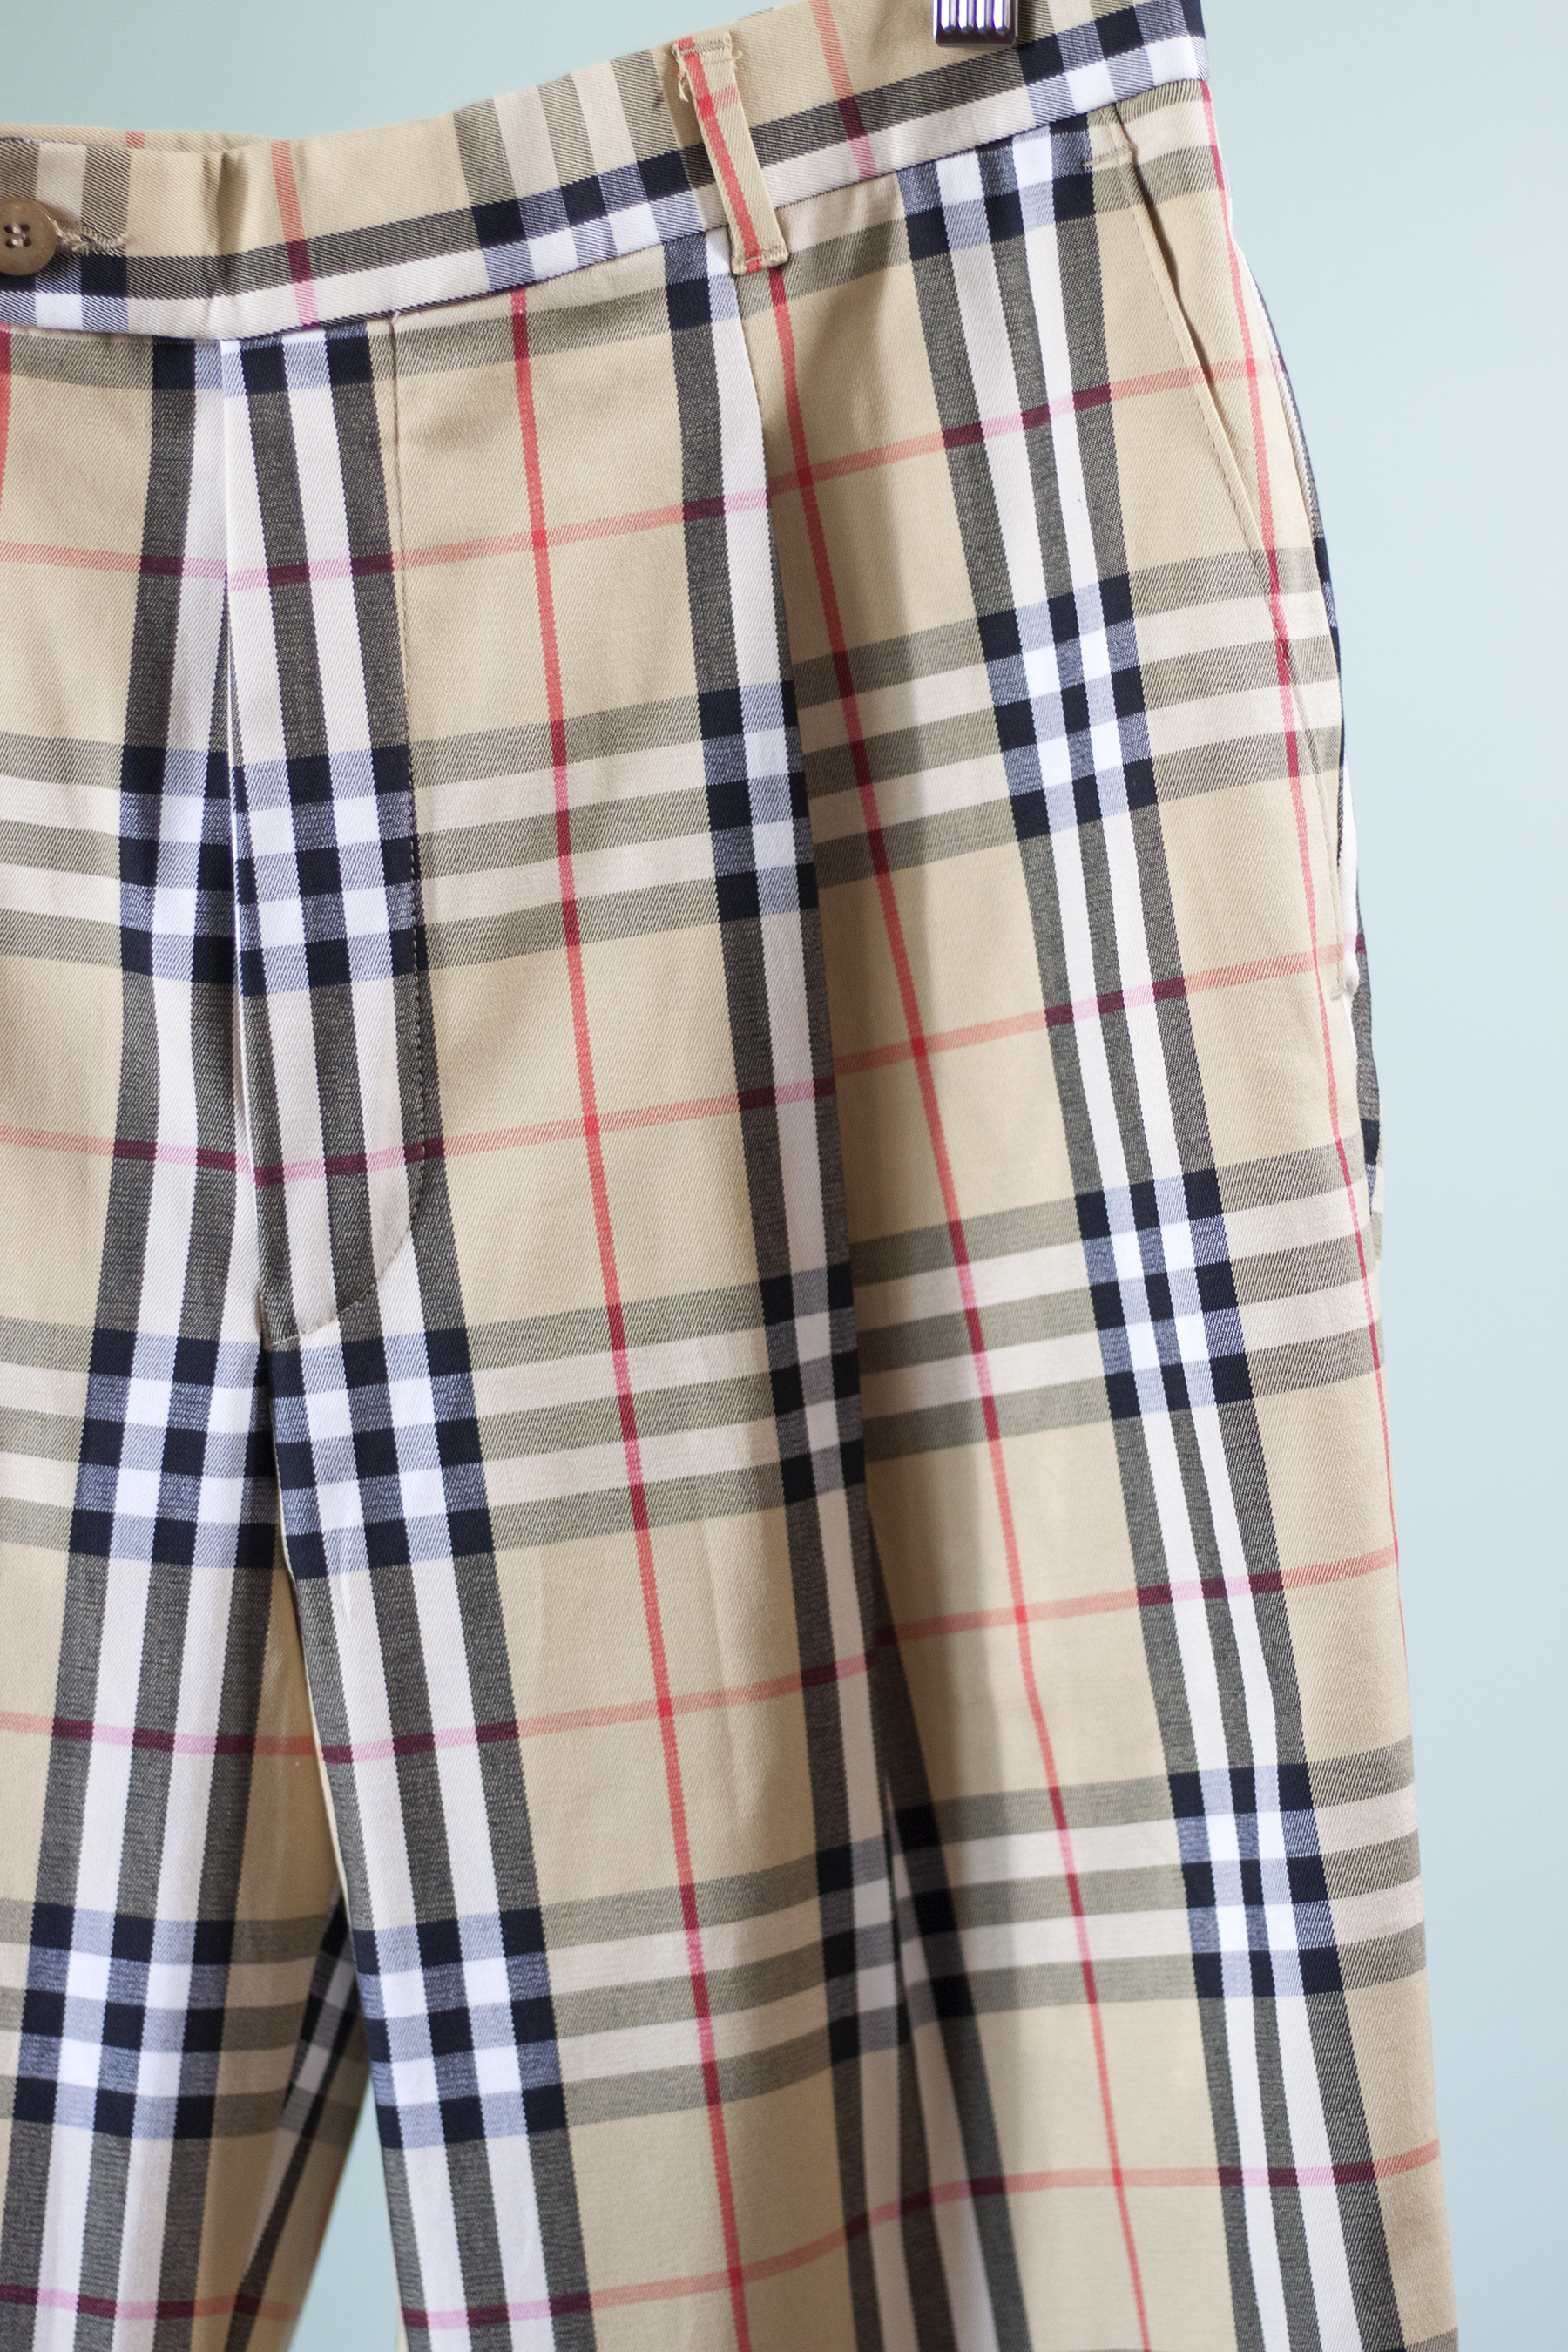 burberry golf trousers